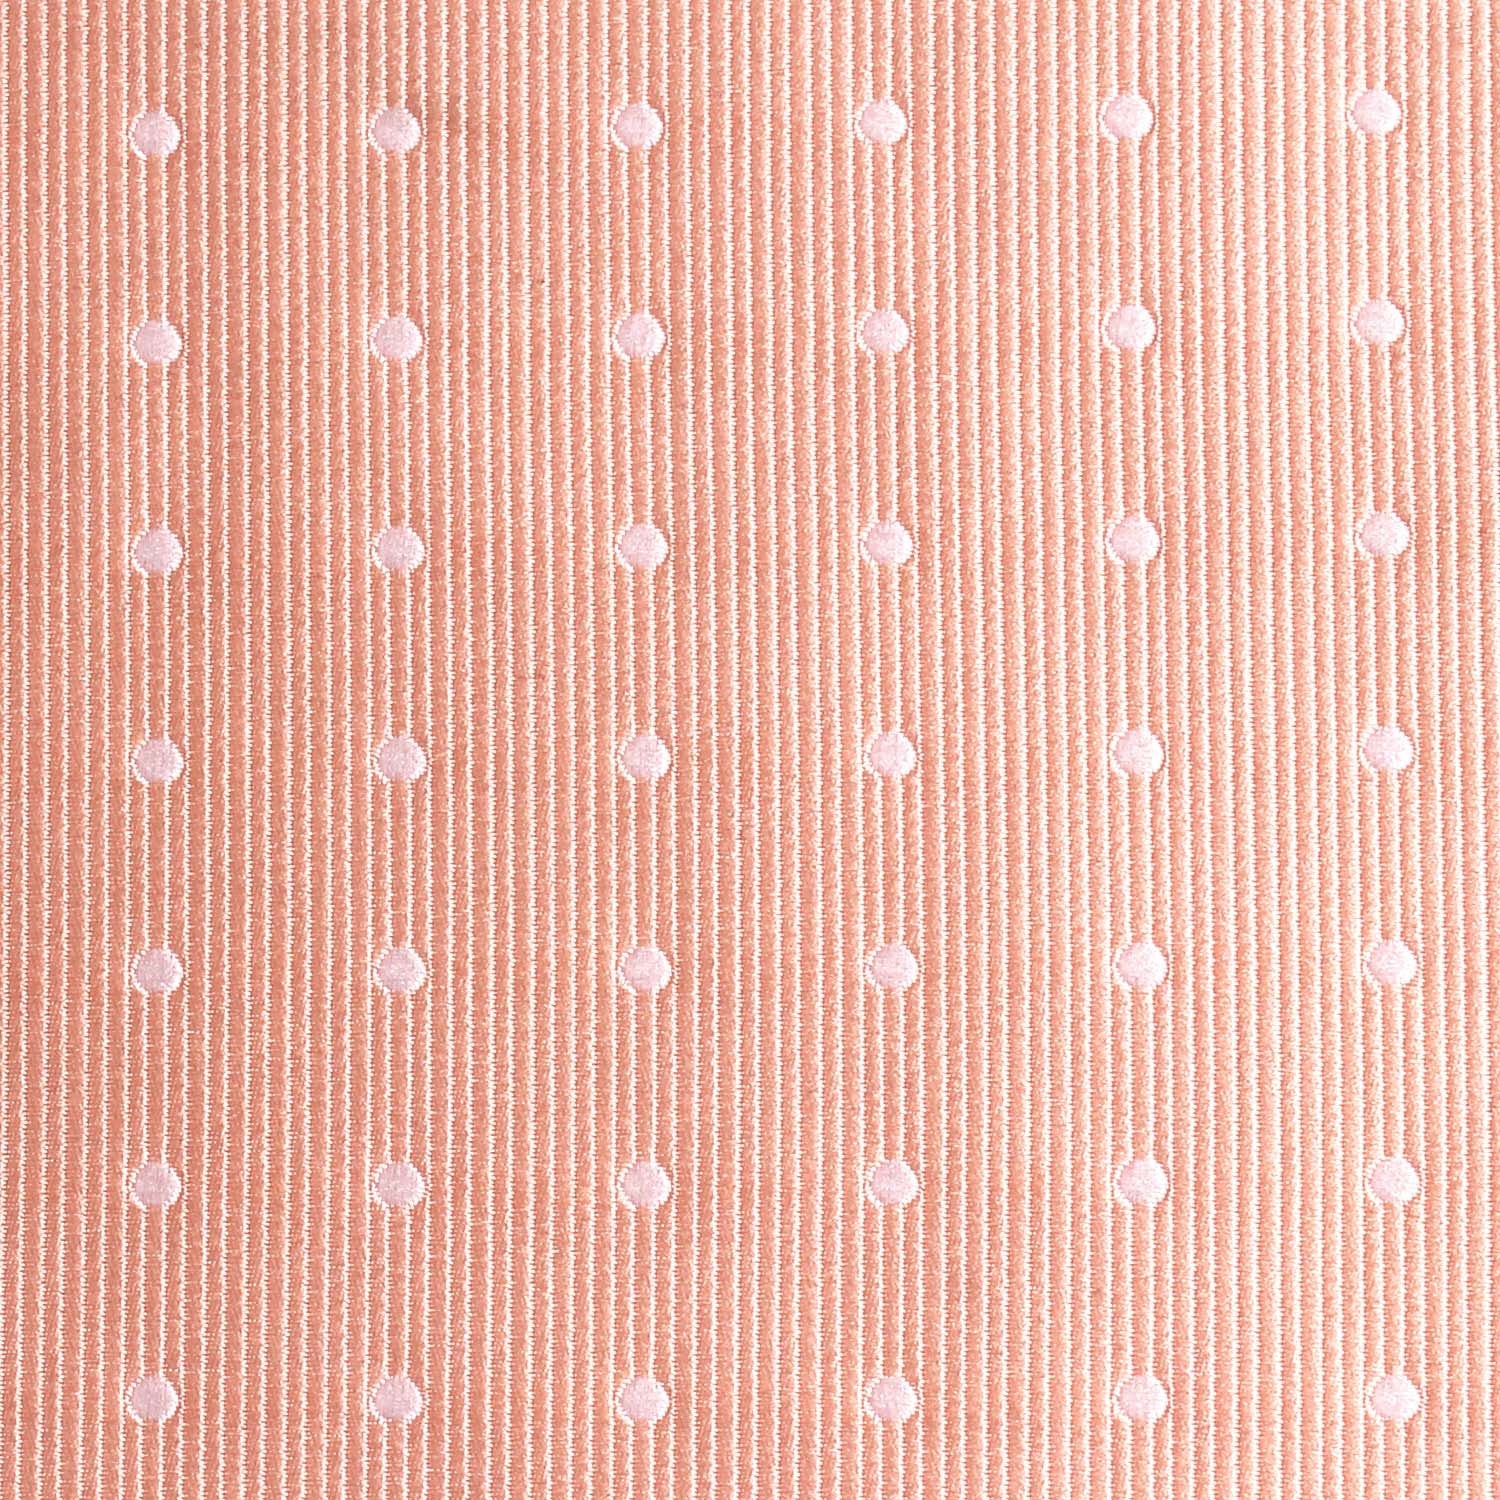 Peach with White Polka Dots Fabric Skinny Tie M134